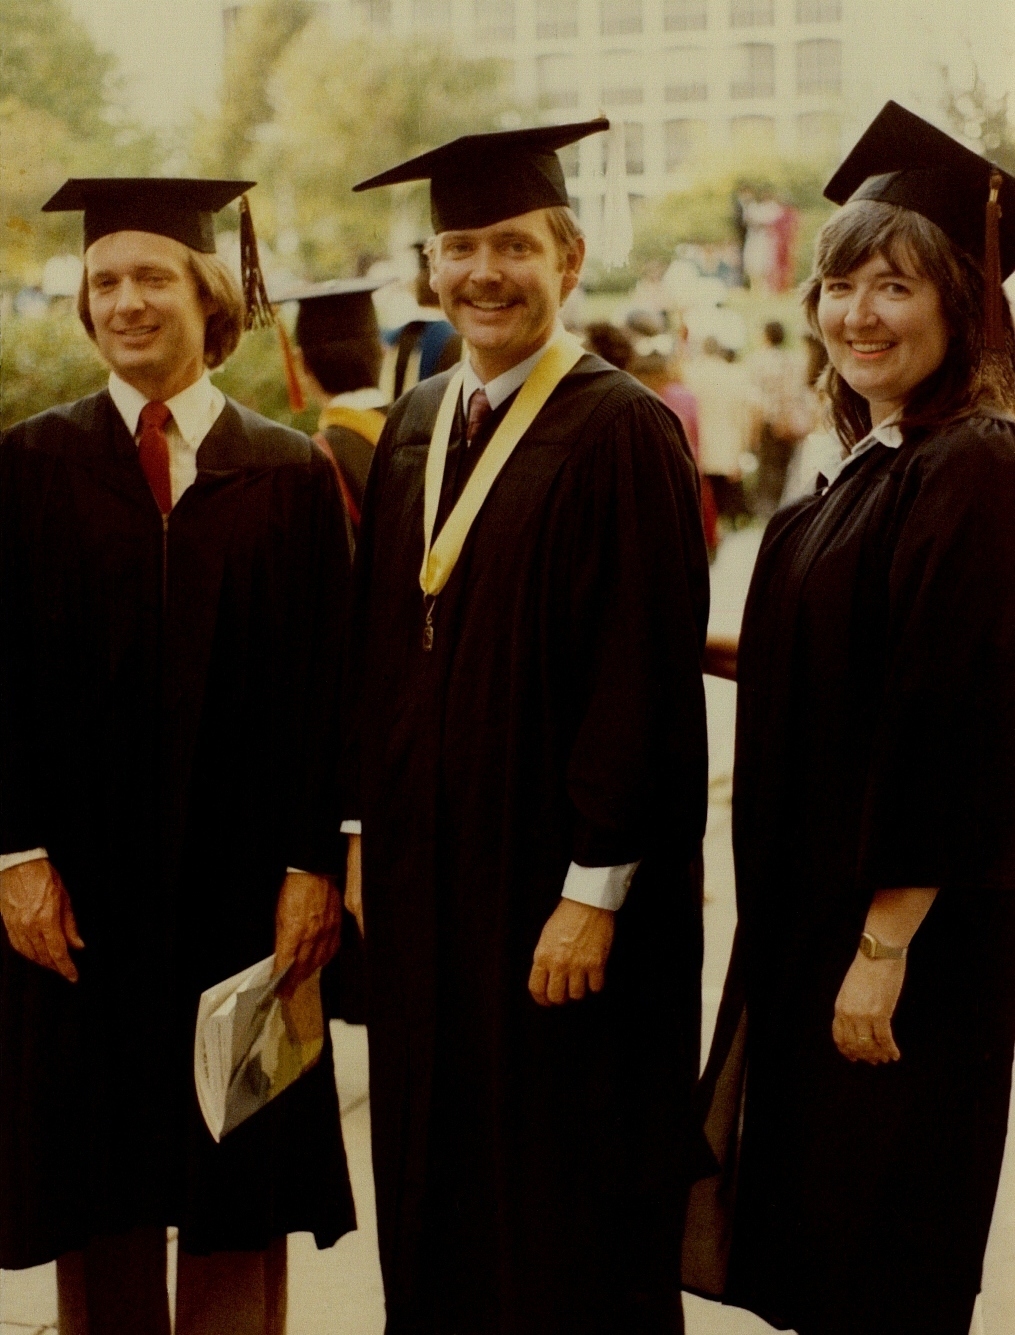 Ron Marlett with his brother and sister at graduation.